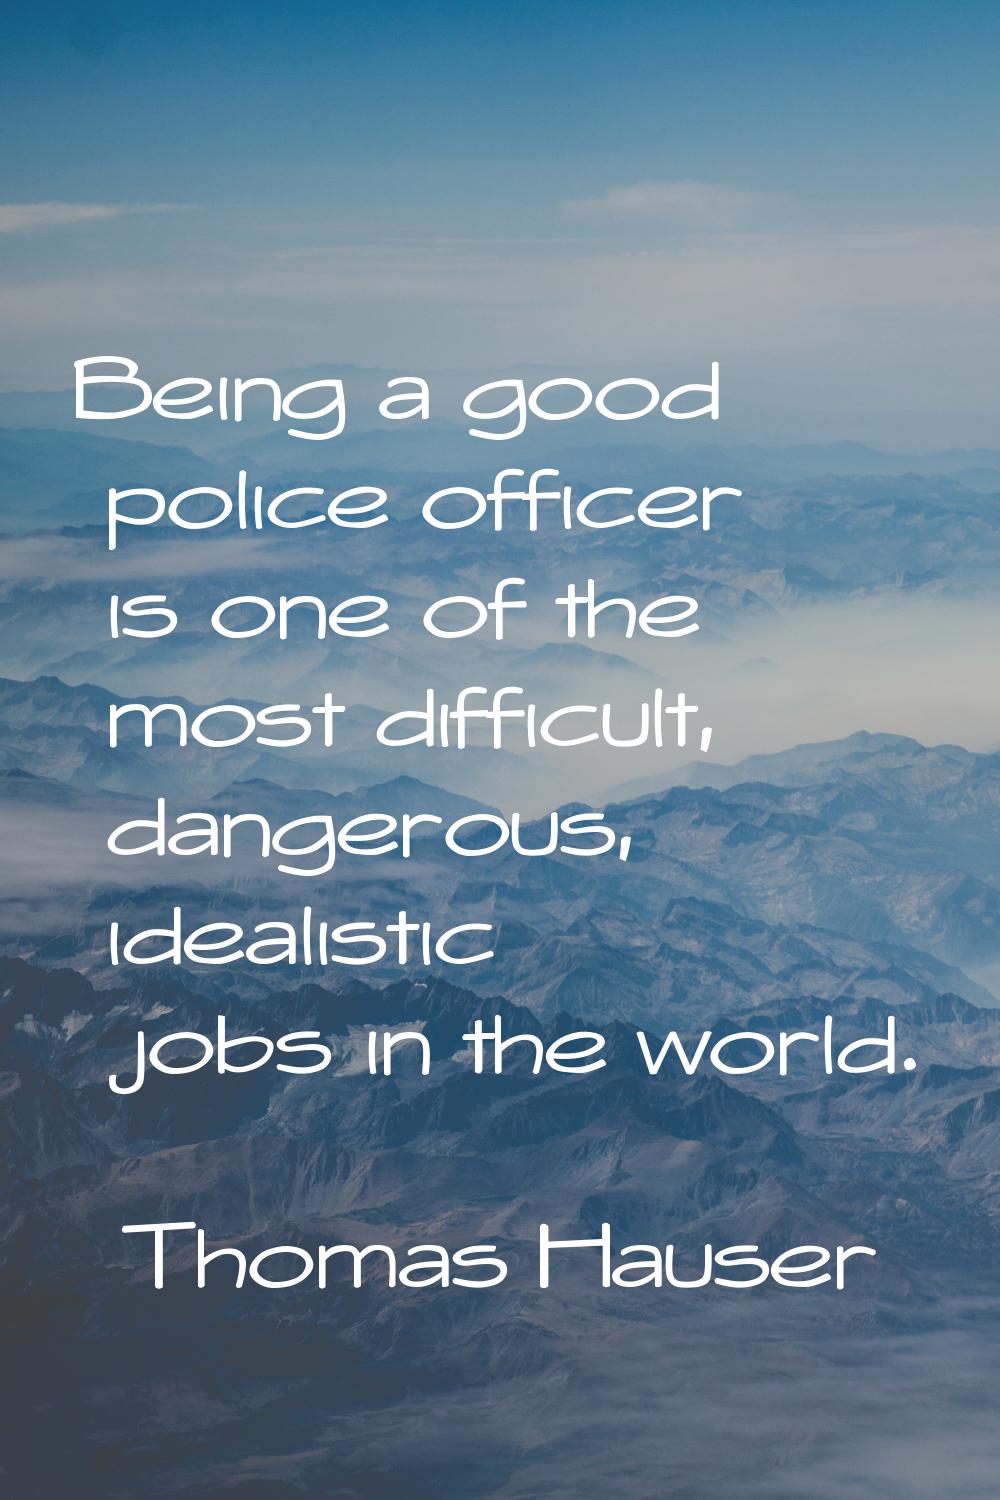 Being a good police officer is one of the most difficult, dangerous, idealistic jobs in the world.